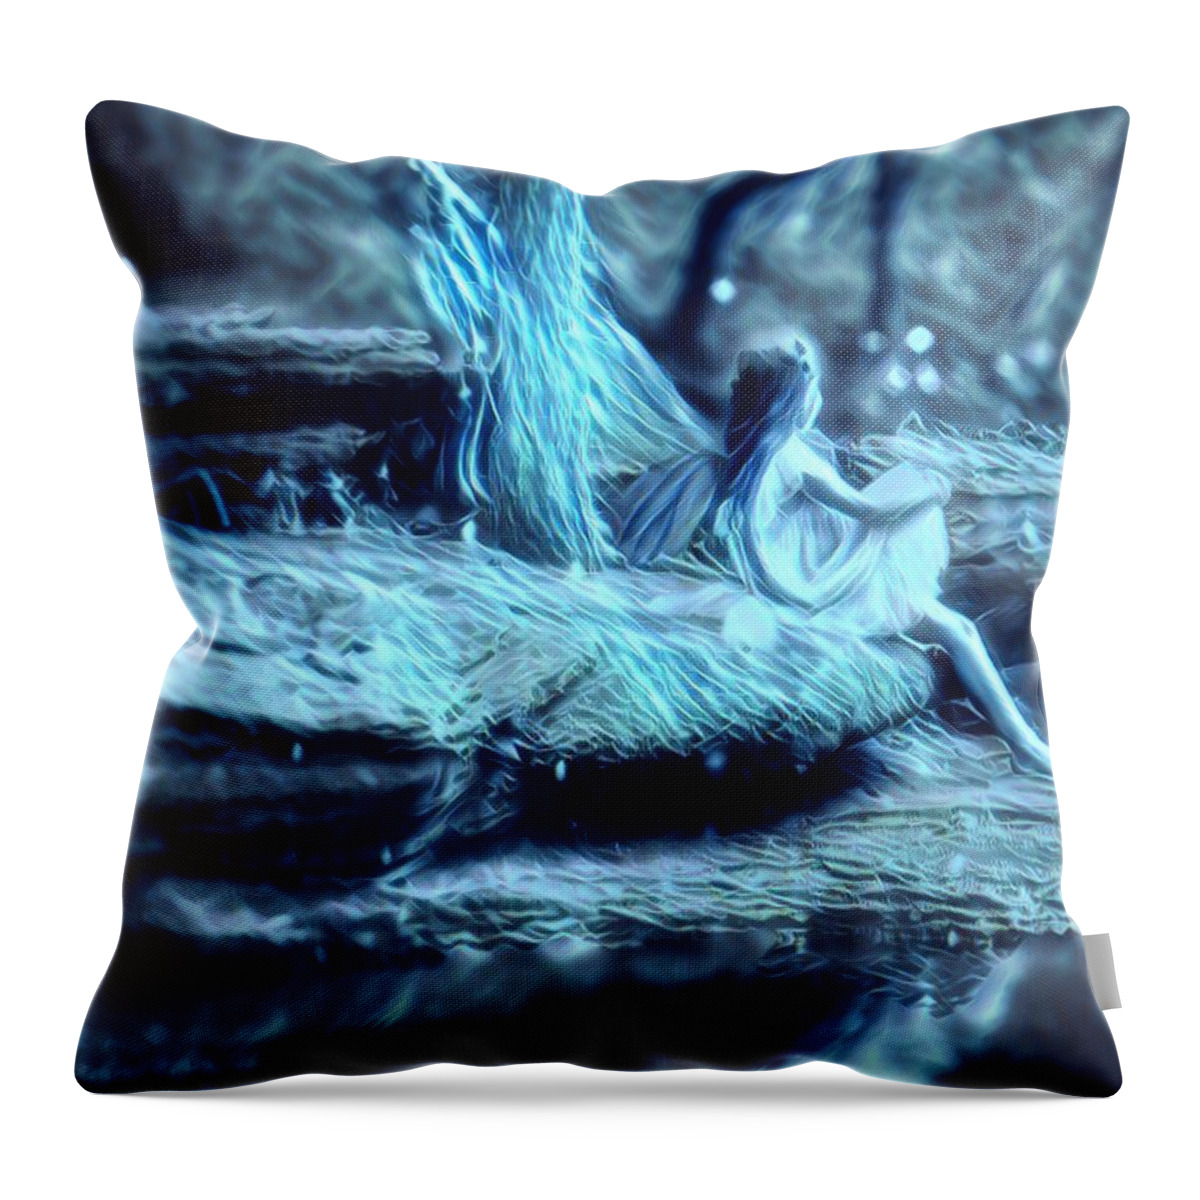 Art Photography Throw Pillow featuring the photograph Fairy Magic by Doris Aguirre